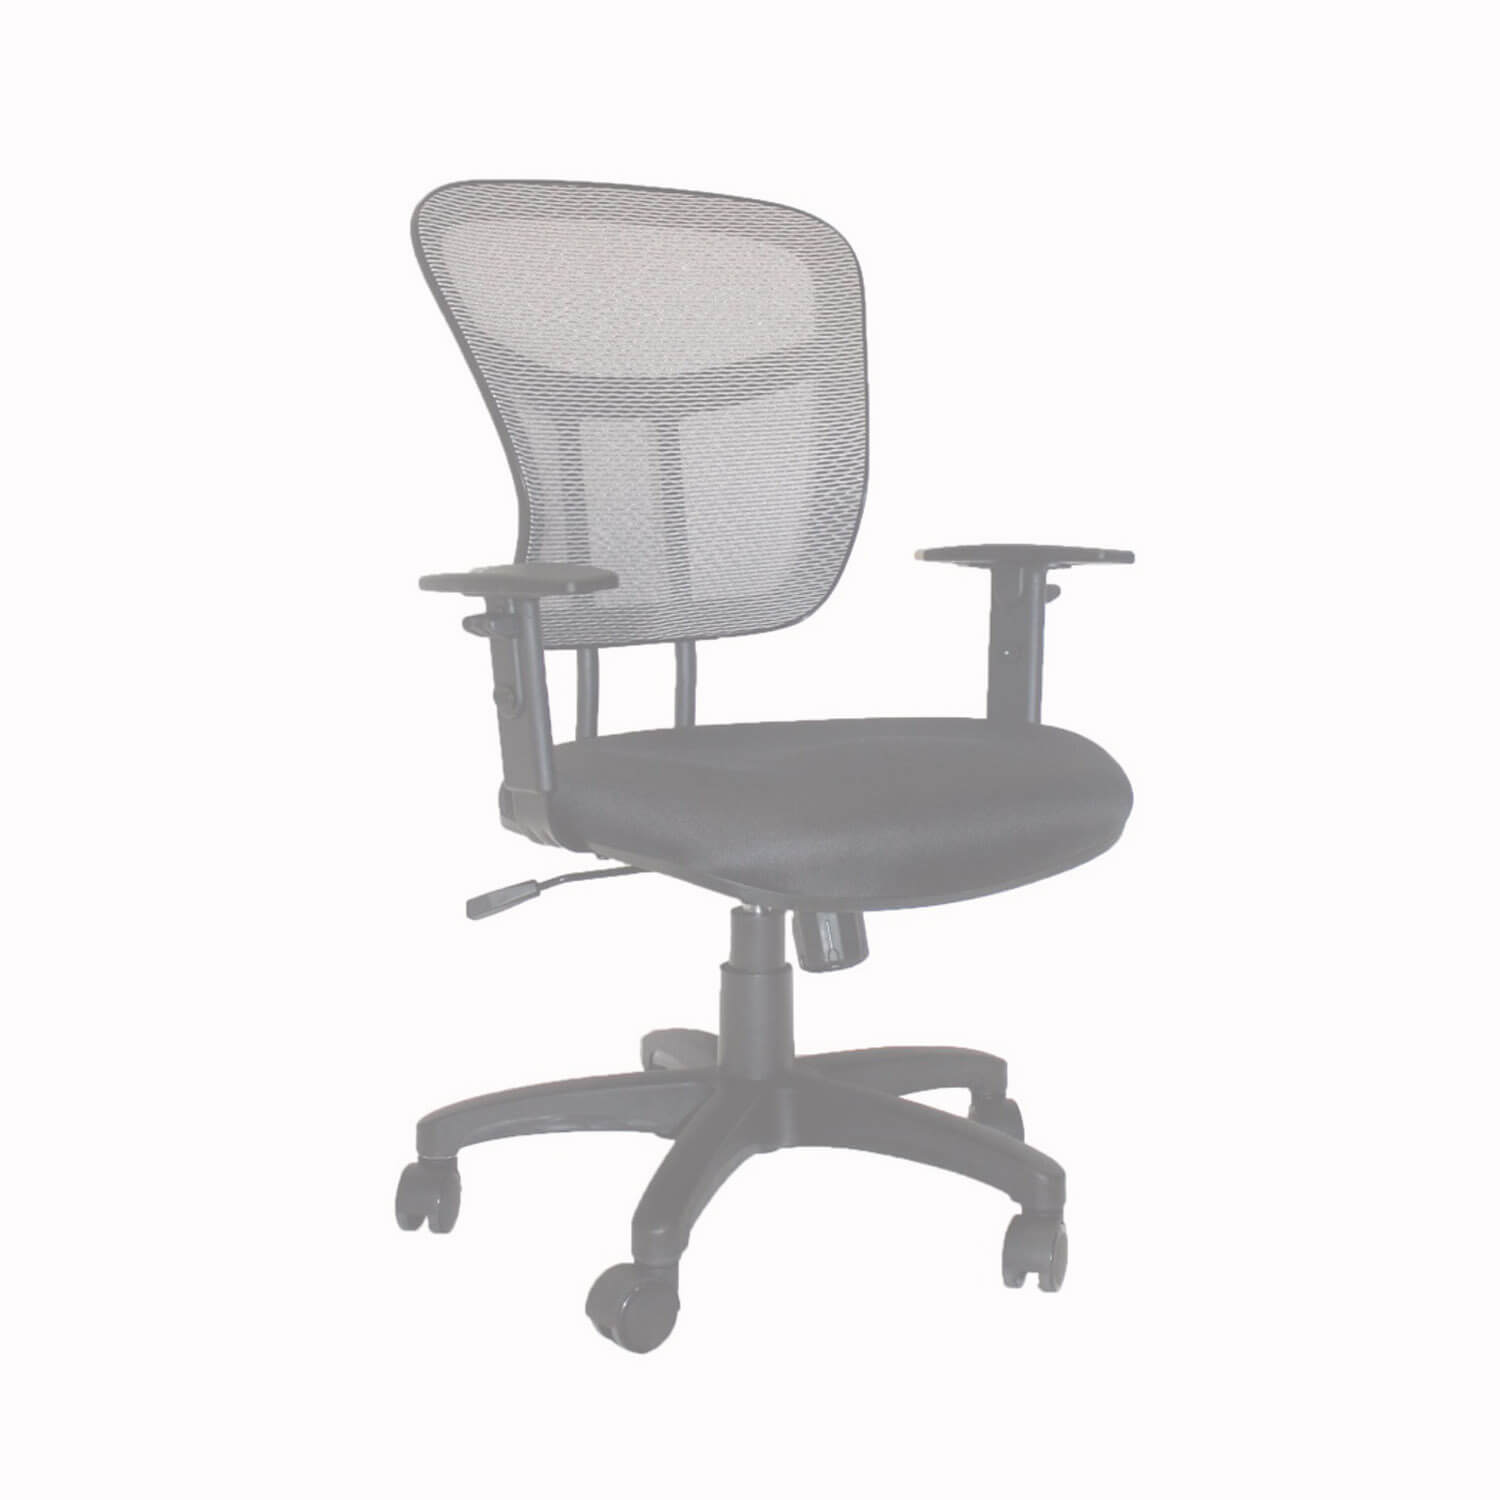 Used Chairs For Sale - OPS 4032 Used Office Furniture For Sale